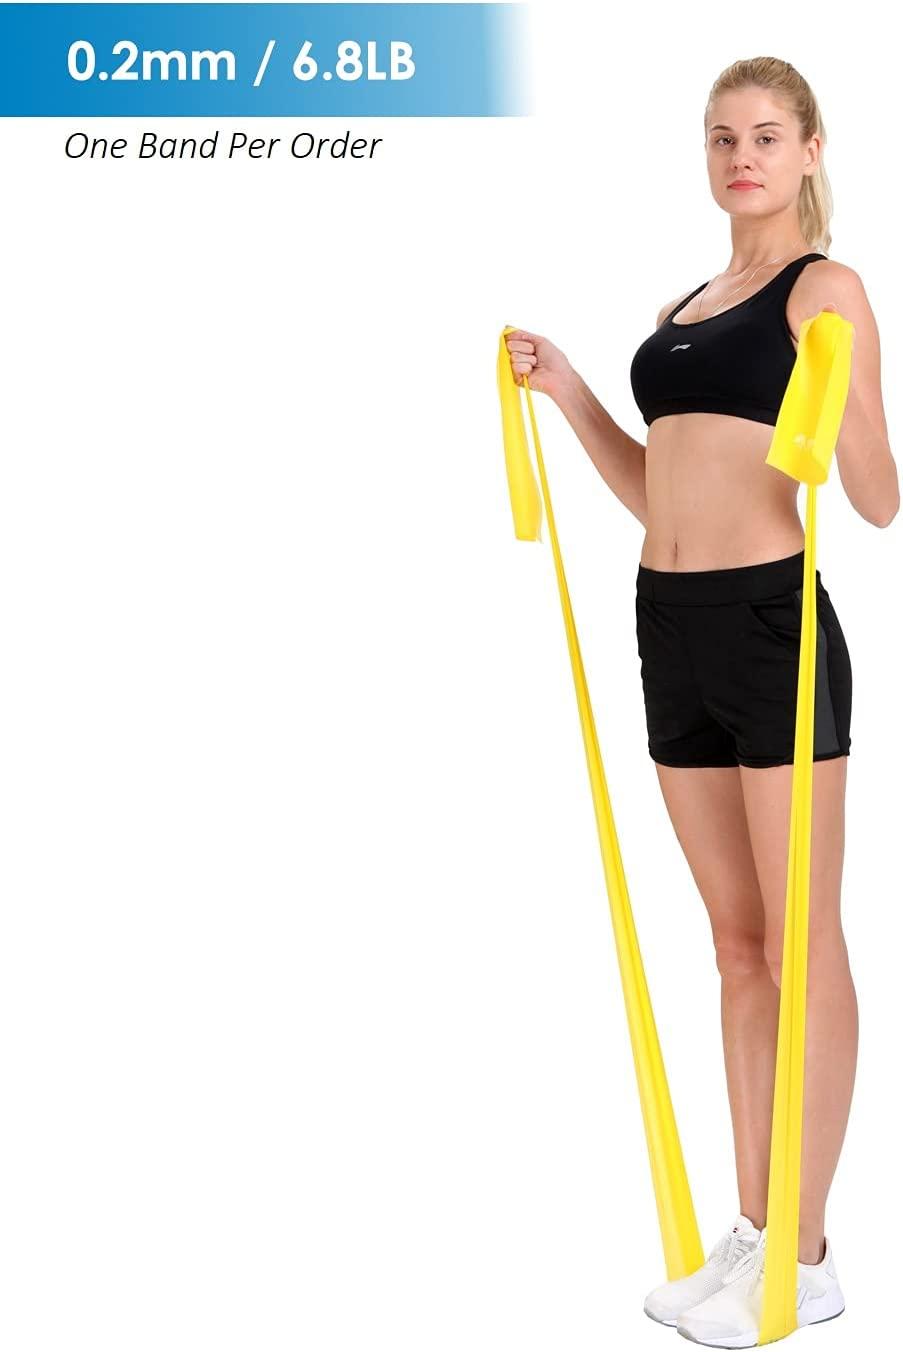 Exercise Bands for Physical Therapy (Sold Singly), Resistance Band for  Yoga, Long Resistance Bands for Working Out, Elastic Band for Exercise at  Home